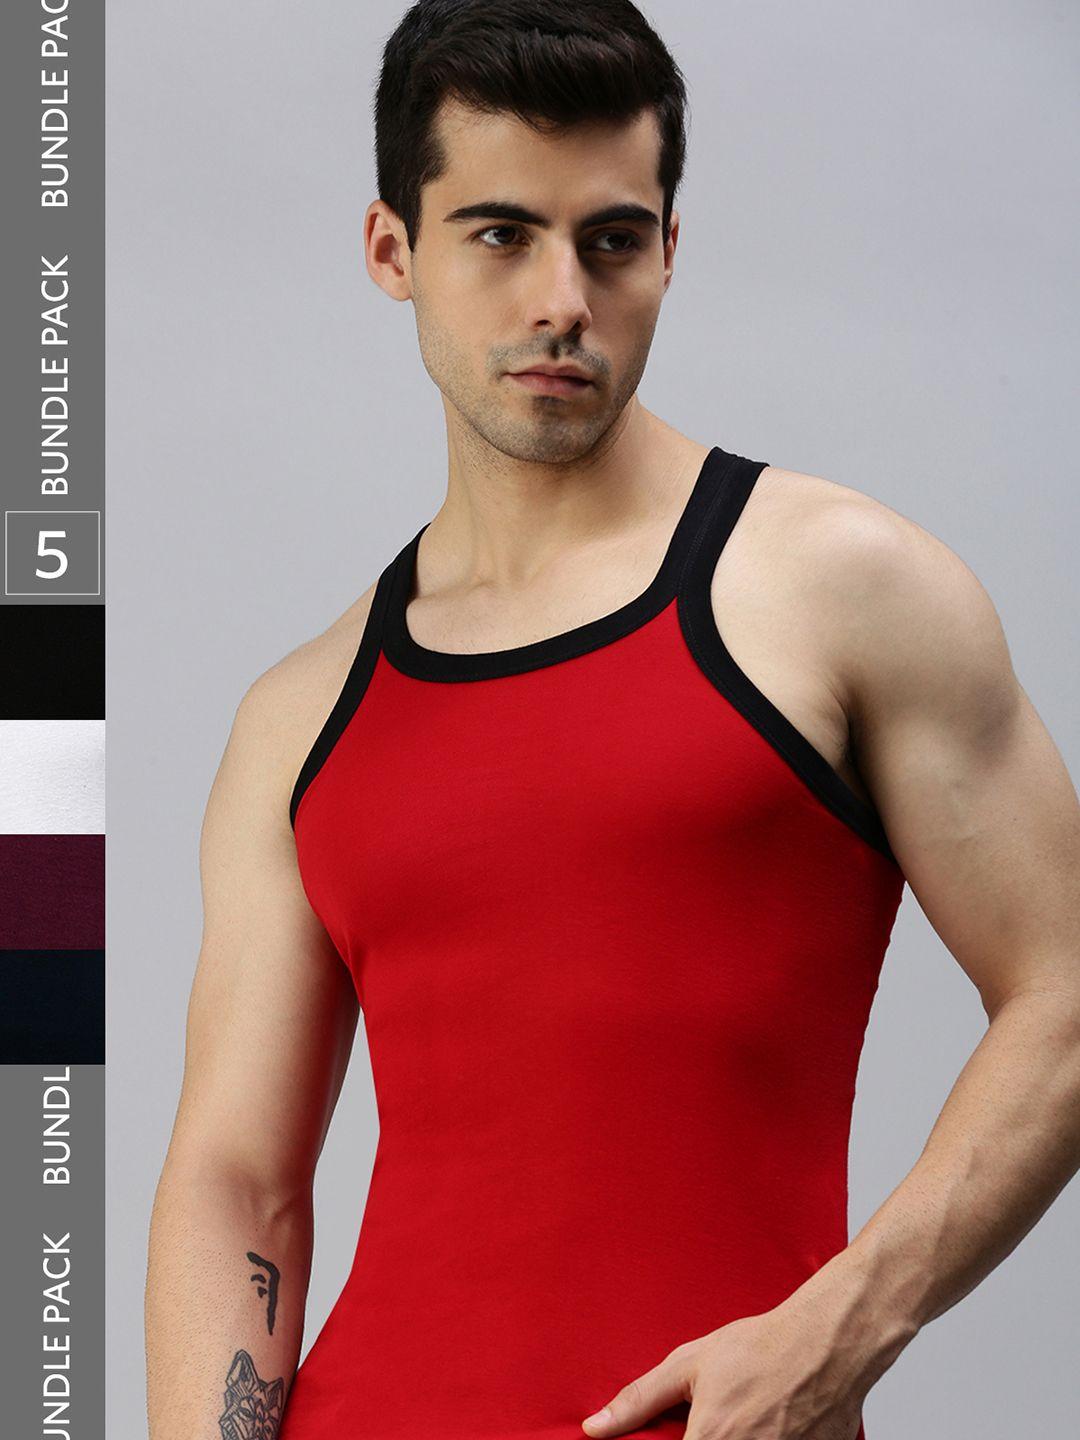 lux cozi men pack of 5 assorted pure cotton innerwear gym vests